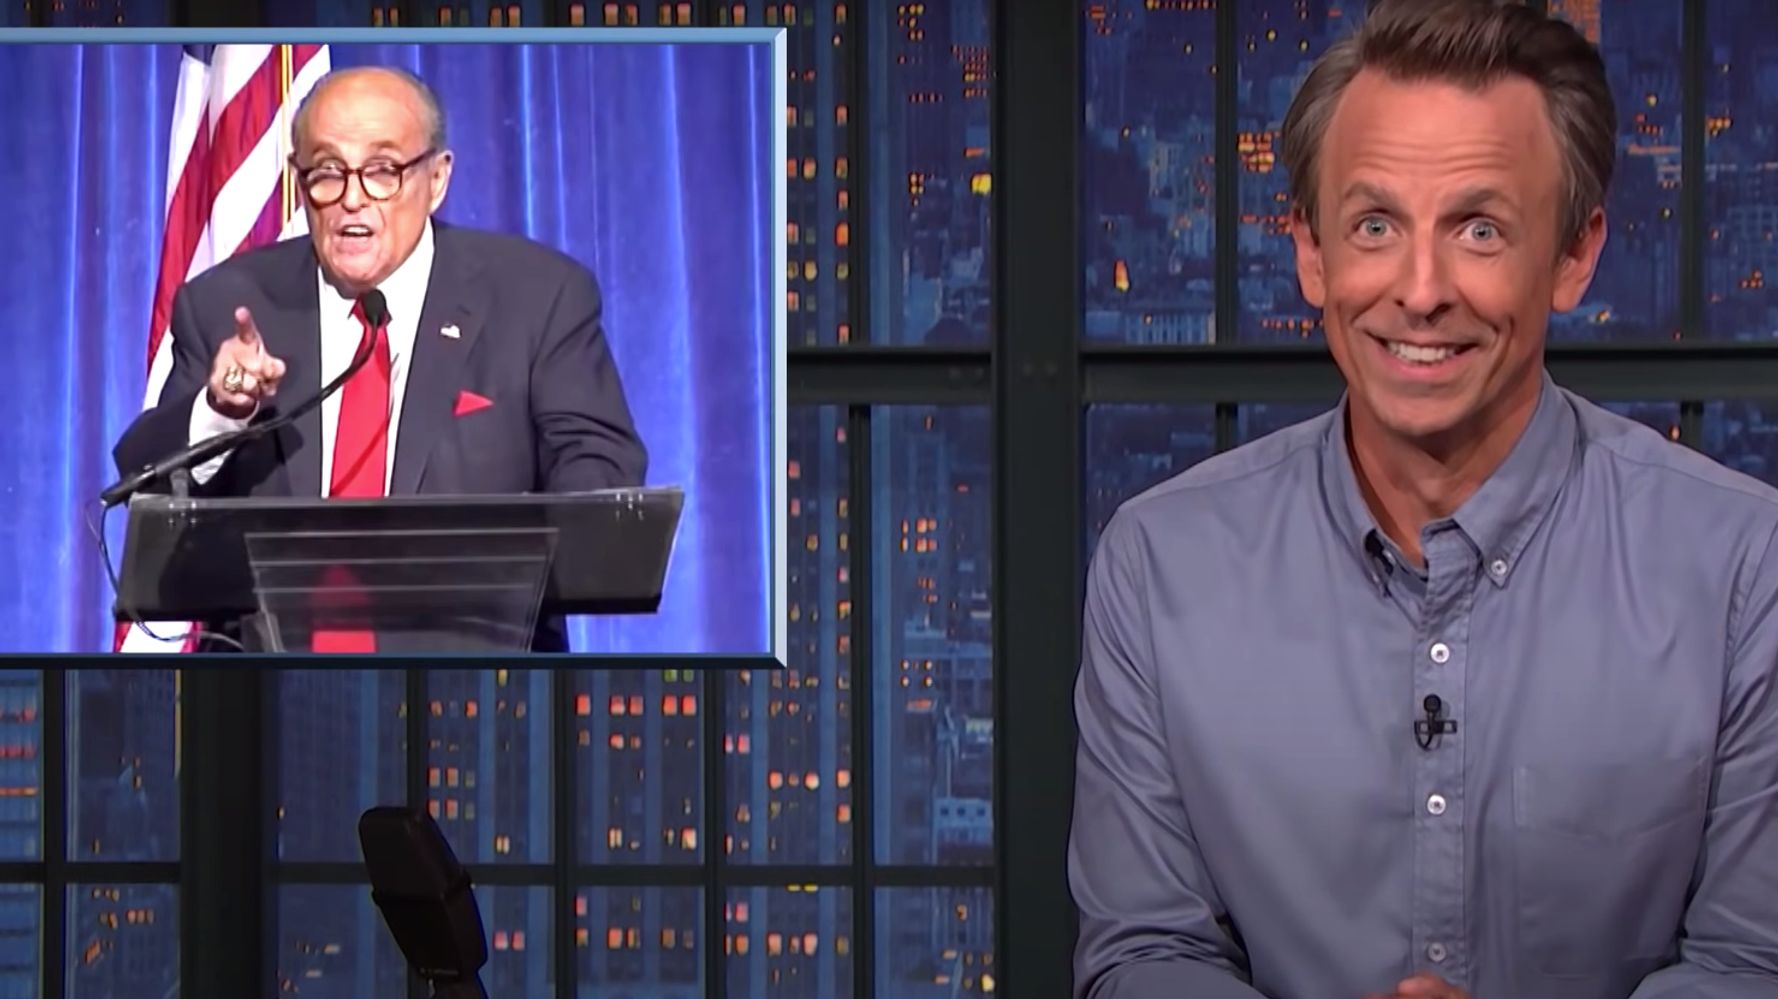 Giuliani's Off-The-Rails Speech Mimicking The Queen Gets The Treatment From Seth Meyers